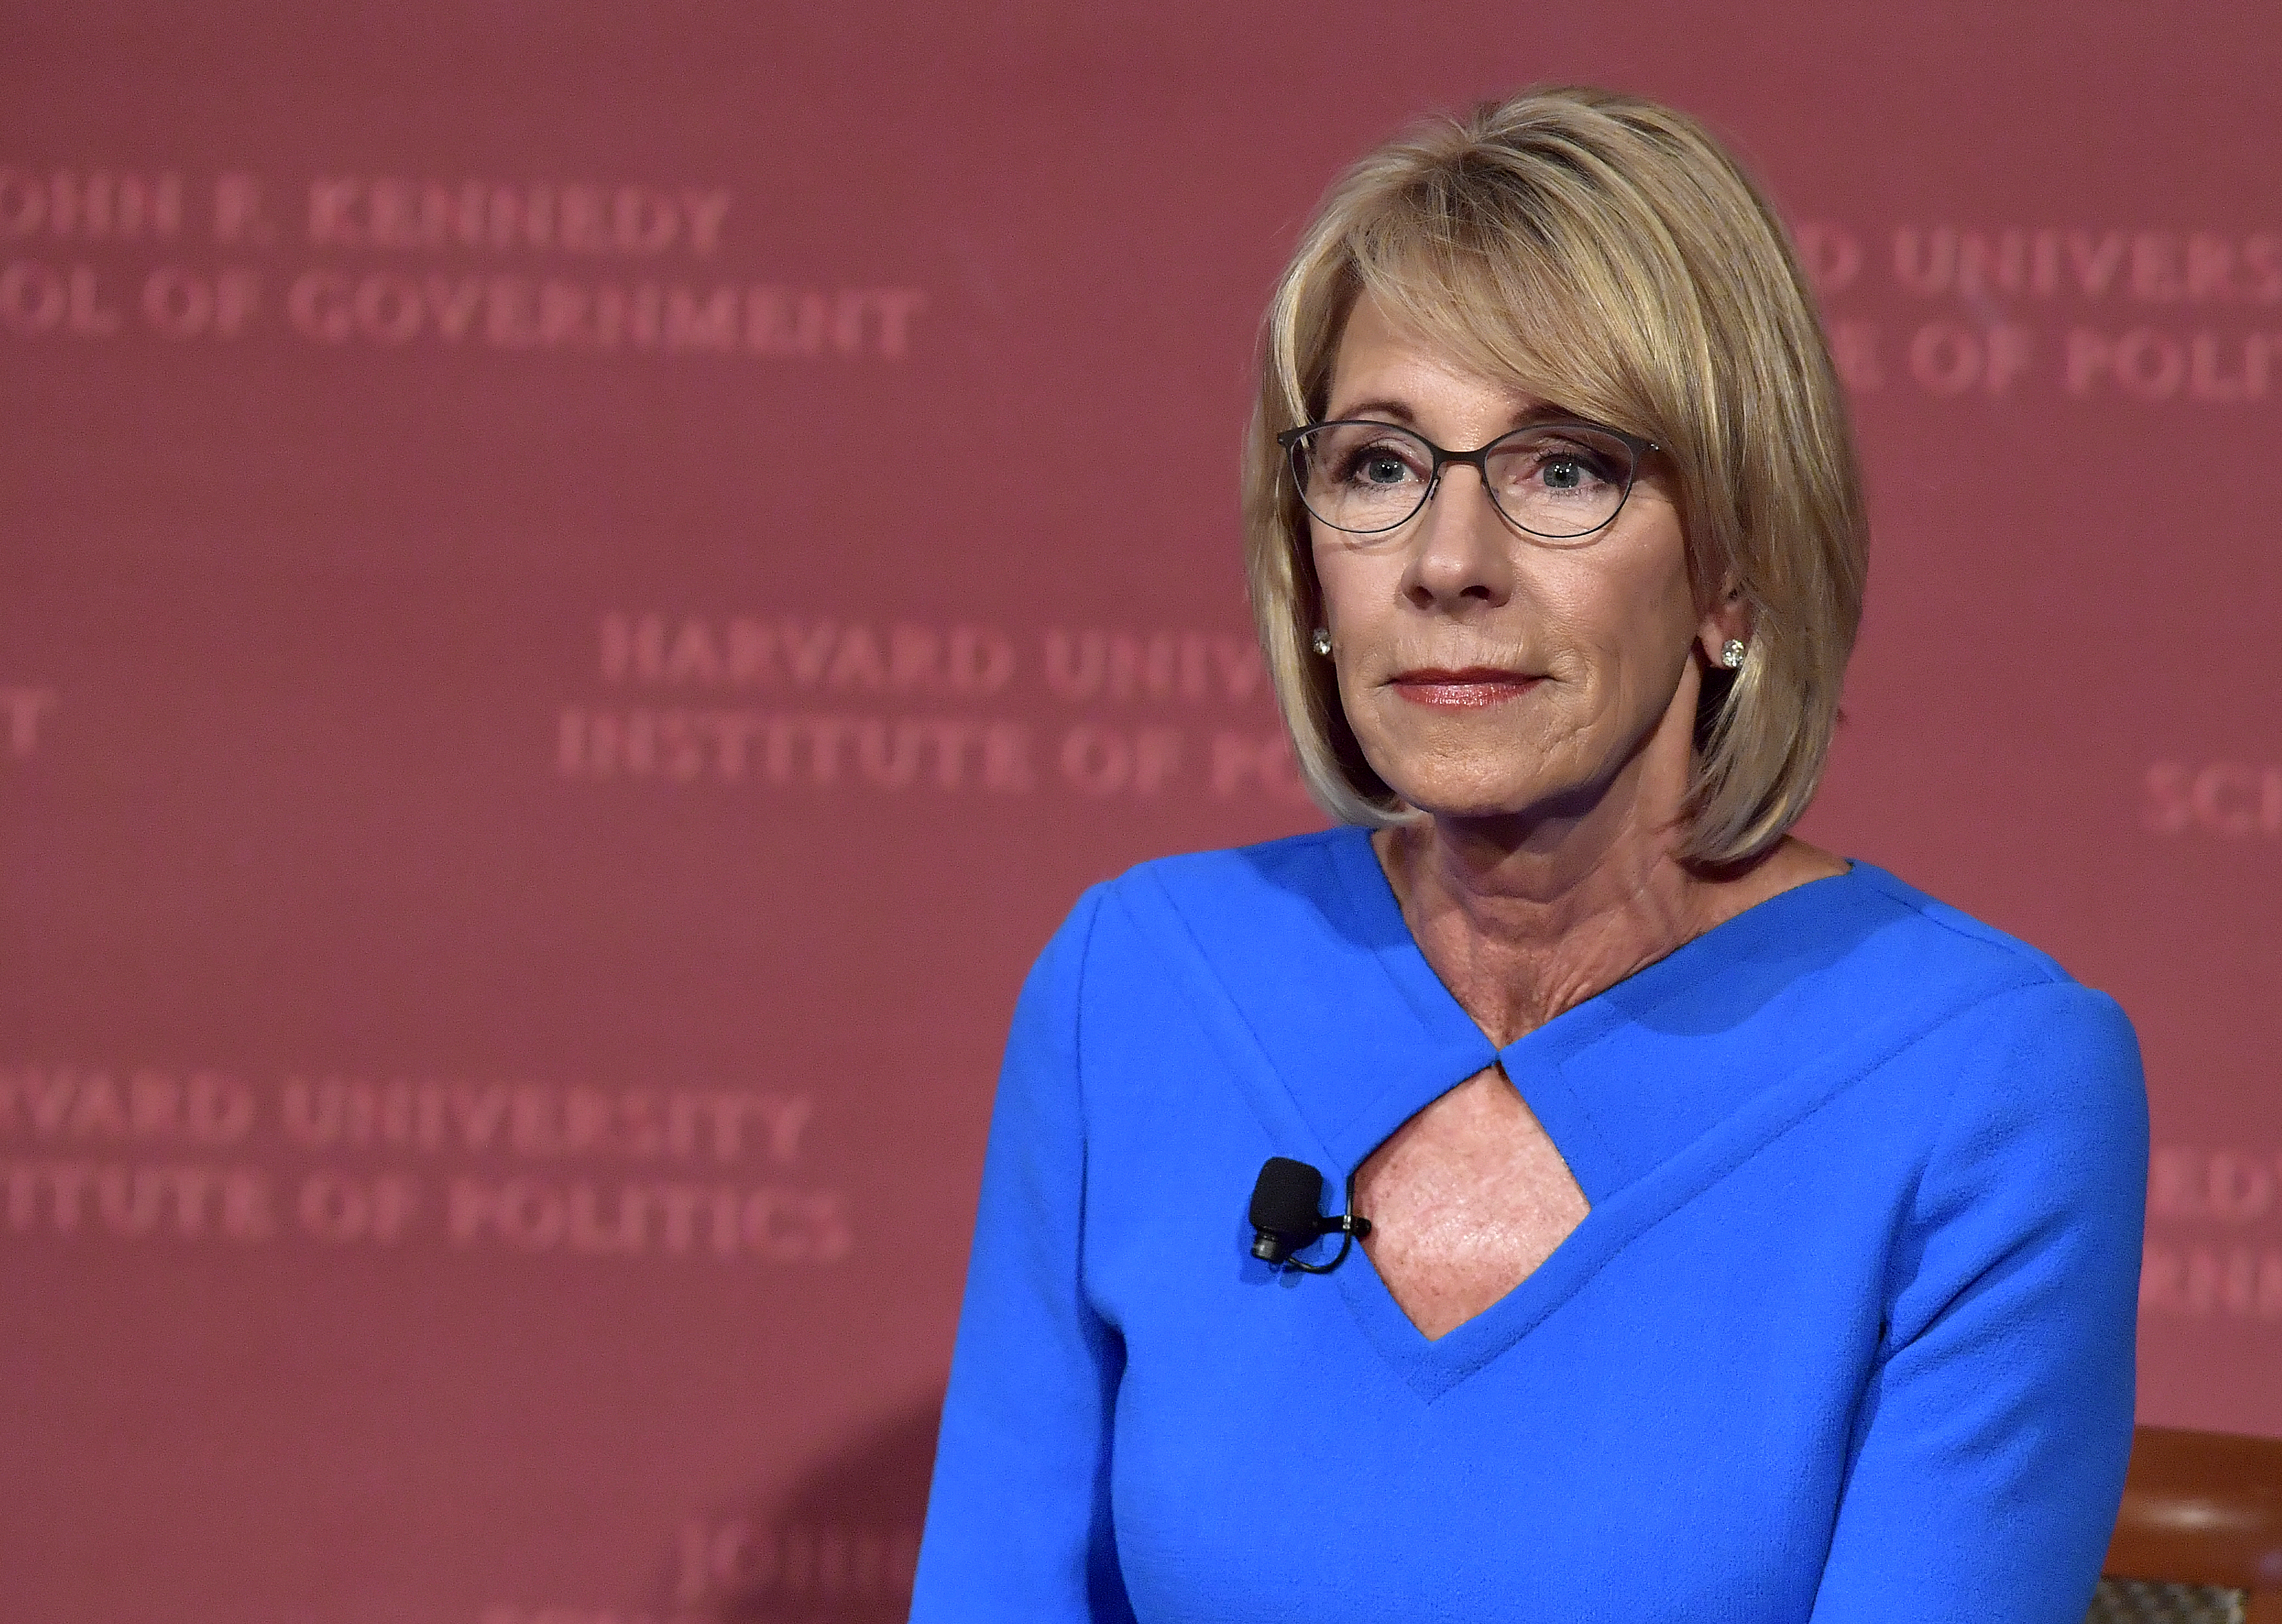 CAMBRIDGE, MA - SEPTEMBER 28:  Education Secretary Betsy DeVos listens during the Harvard University John F. Kennedy Jr. Forum on "A Conversation On Empowering Parents" moderated by Paul Peterson on September 28, 2017 in Cambridge, Massachusetts.  DeVos was met by protestors both outside the venue and inside during her remarks.  (Photo by Paul Marotta/Getty Images) (Paul Marotta&mdash;Getty Images)